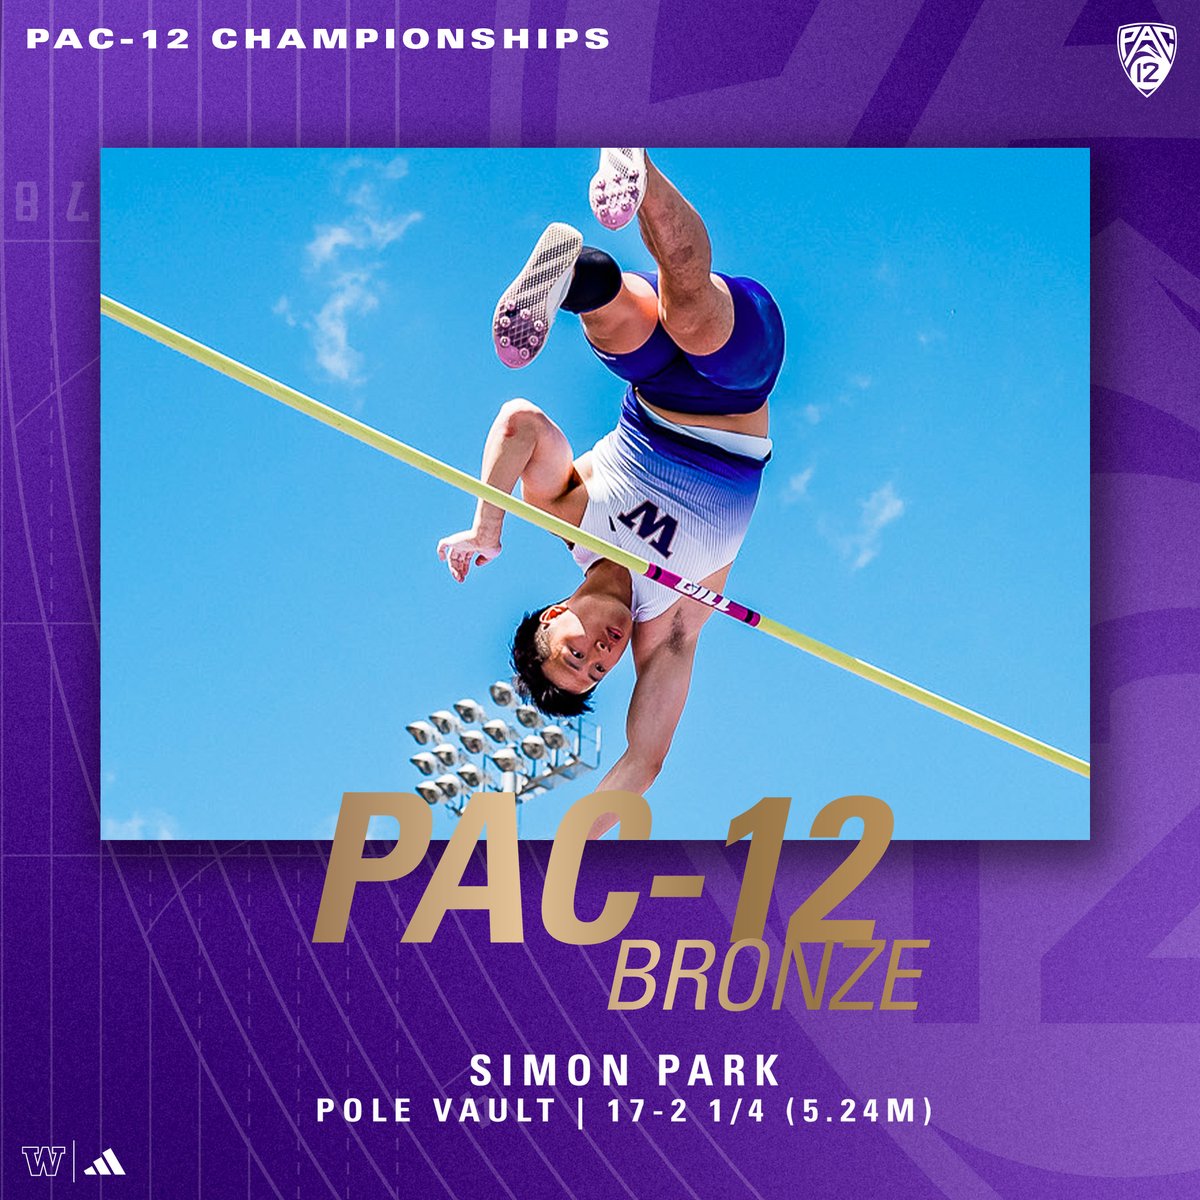 Max Manson and Simon Park fly for Silver and Bronze! 🥈🥉 A huge event for the Dawgs as the two transfers reach the podium. +14 𝑇𝐸𝐴𝑀 𝑃𝑂𝐼𝑁𝑇𝑆 👀👀 #GoHuskies x #Pac12TF